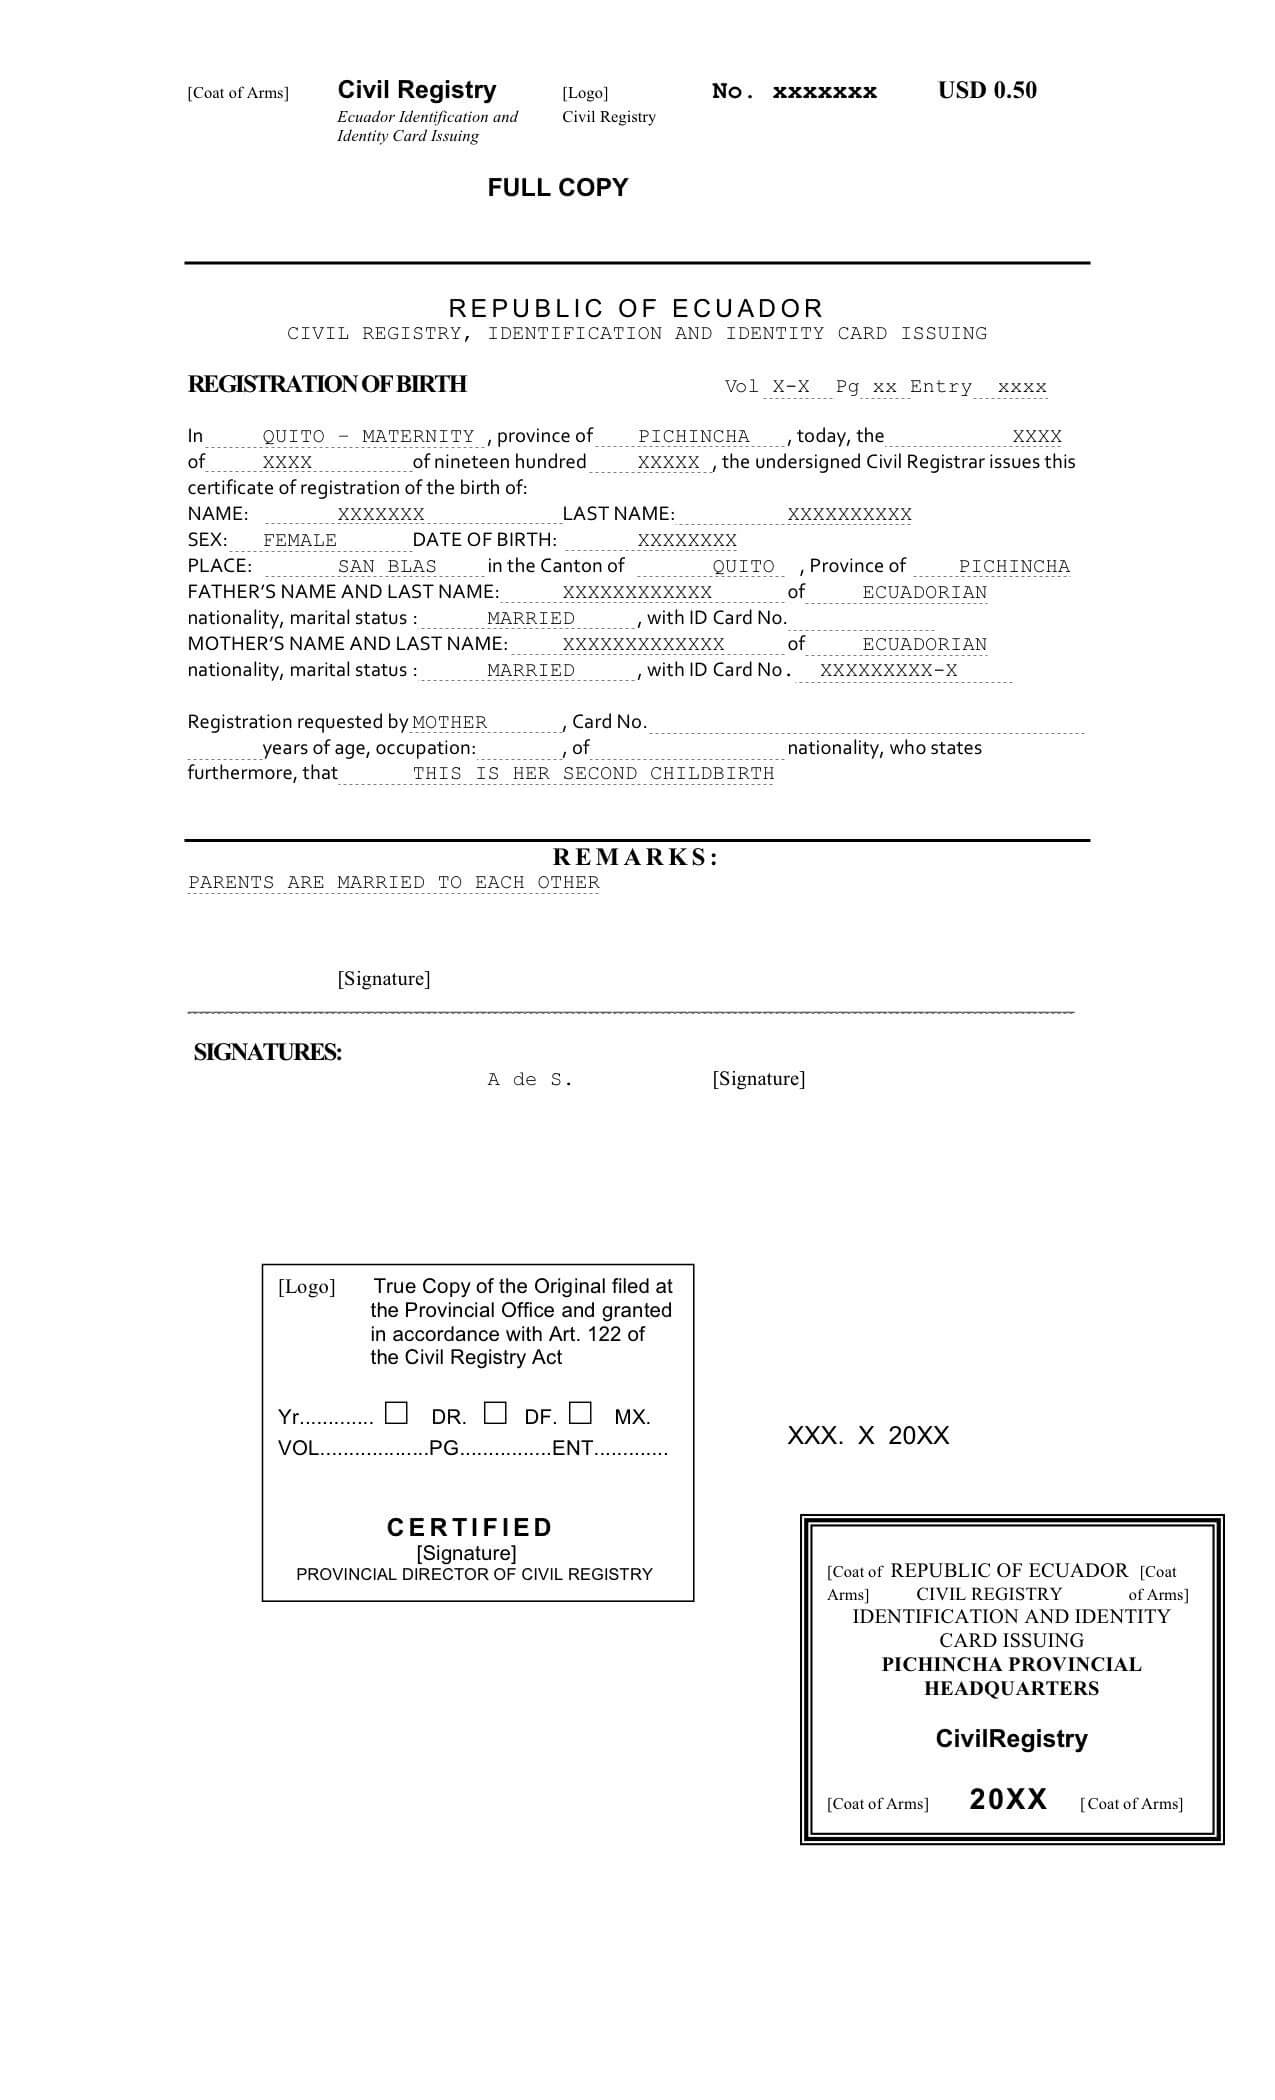 Death Certificate Translation From Spanish To English Sample Regarding Birth Certificate Translation Template